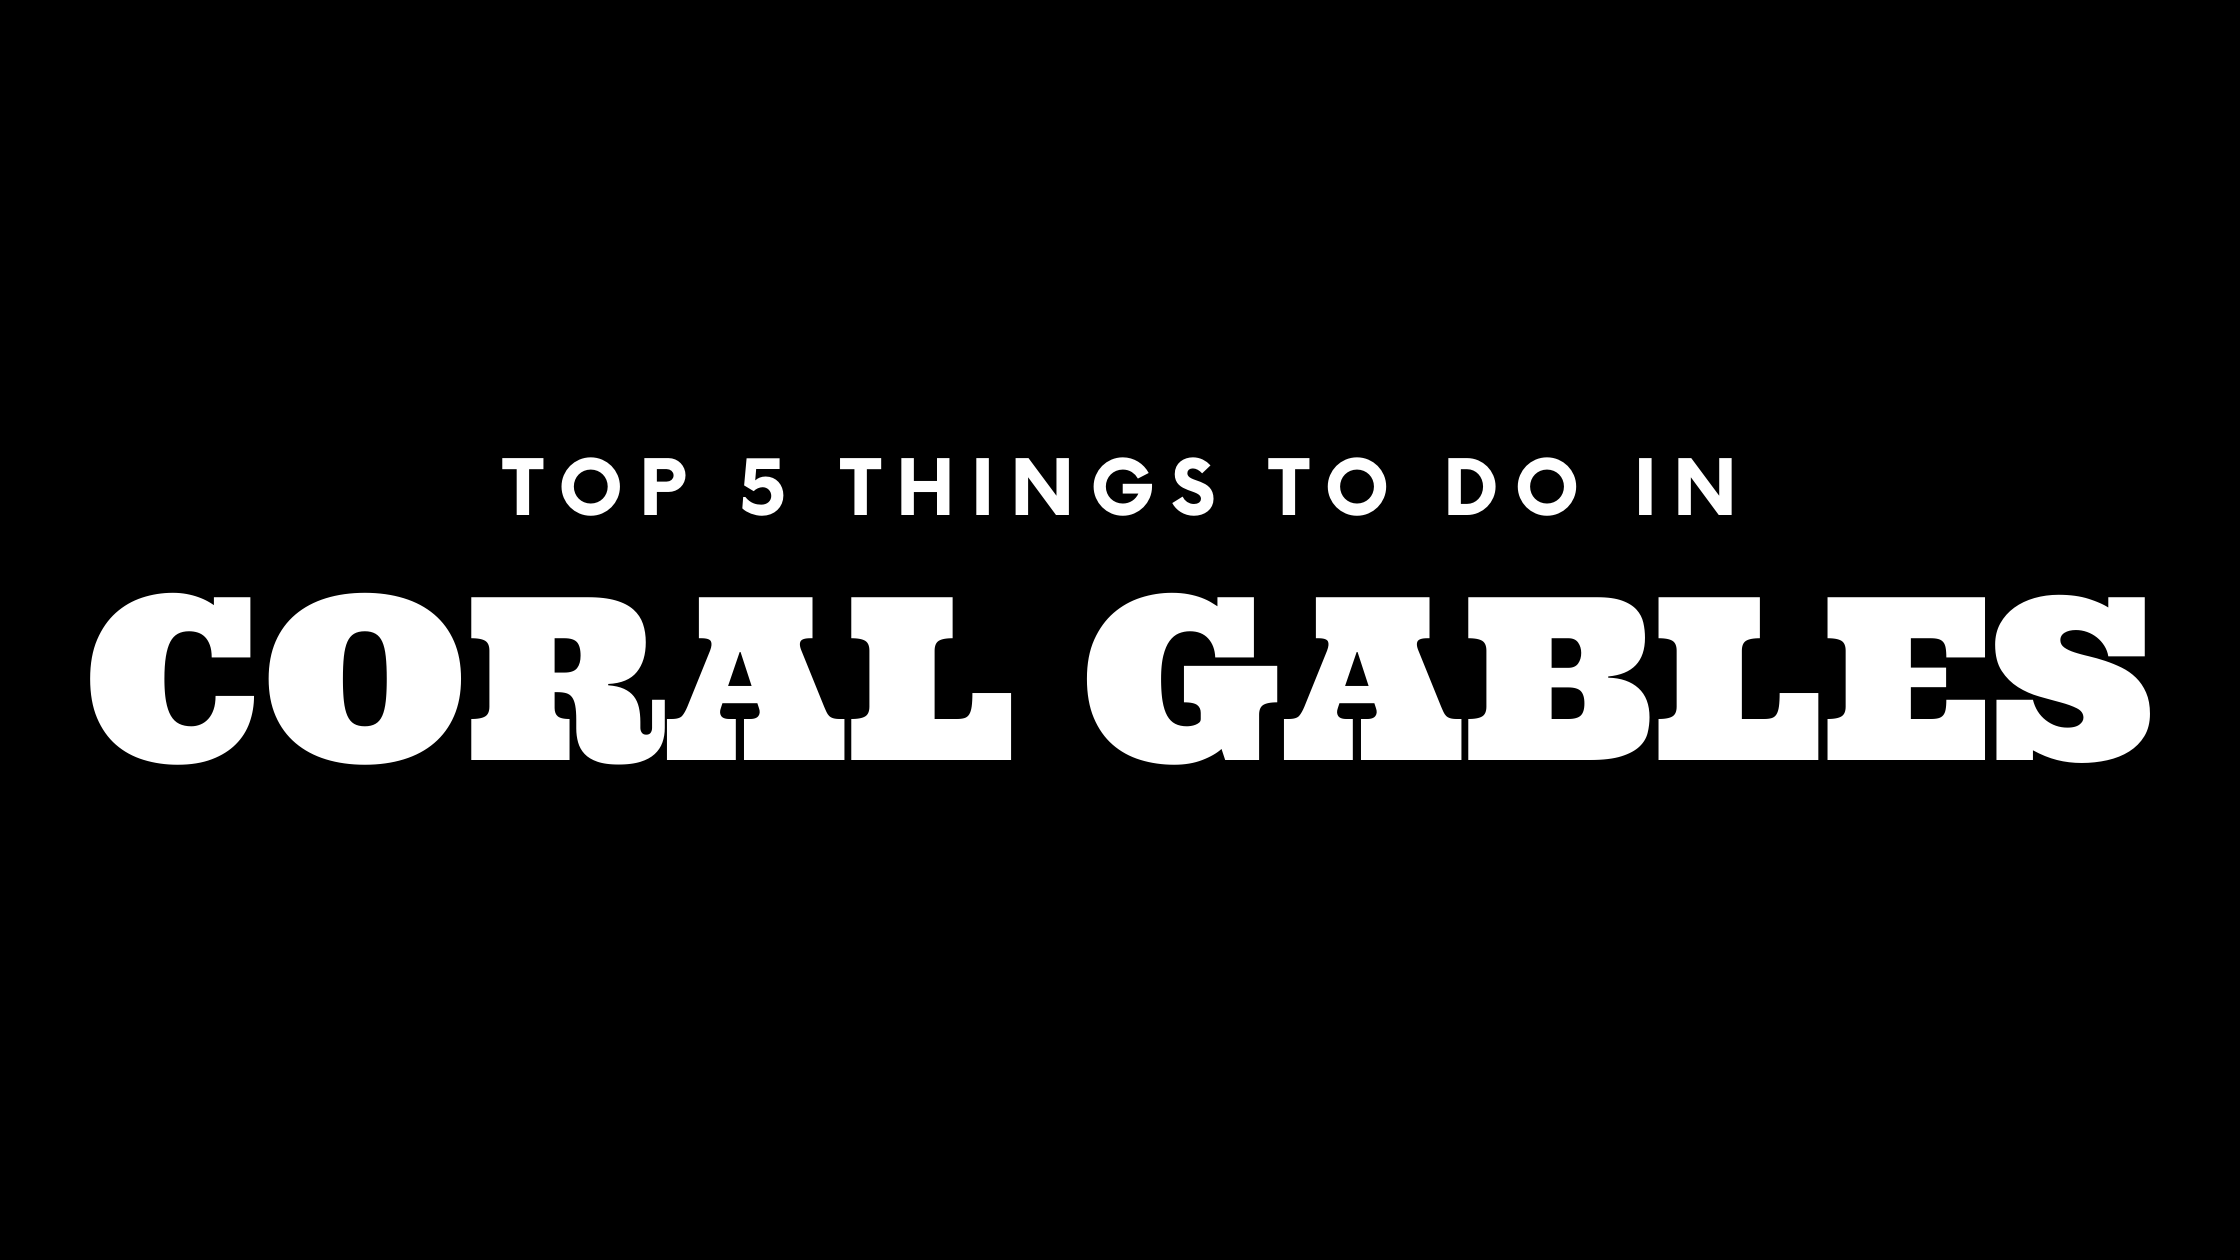 Top 5 Things To Do in Coral Gables